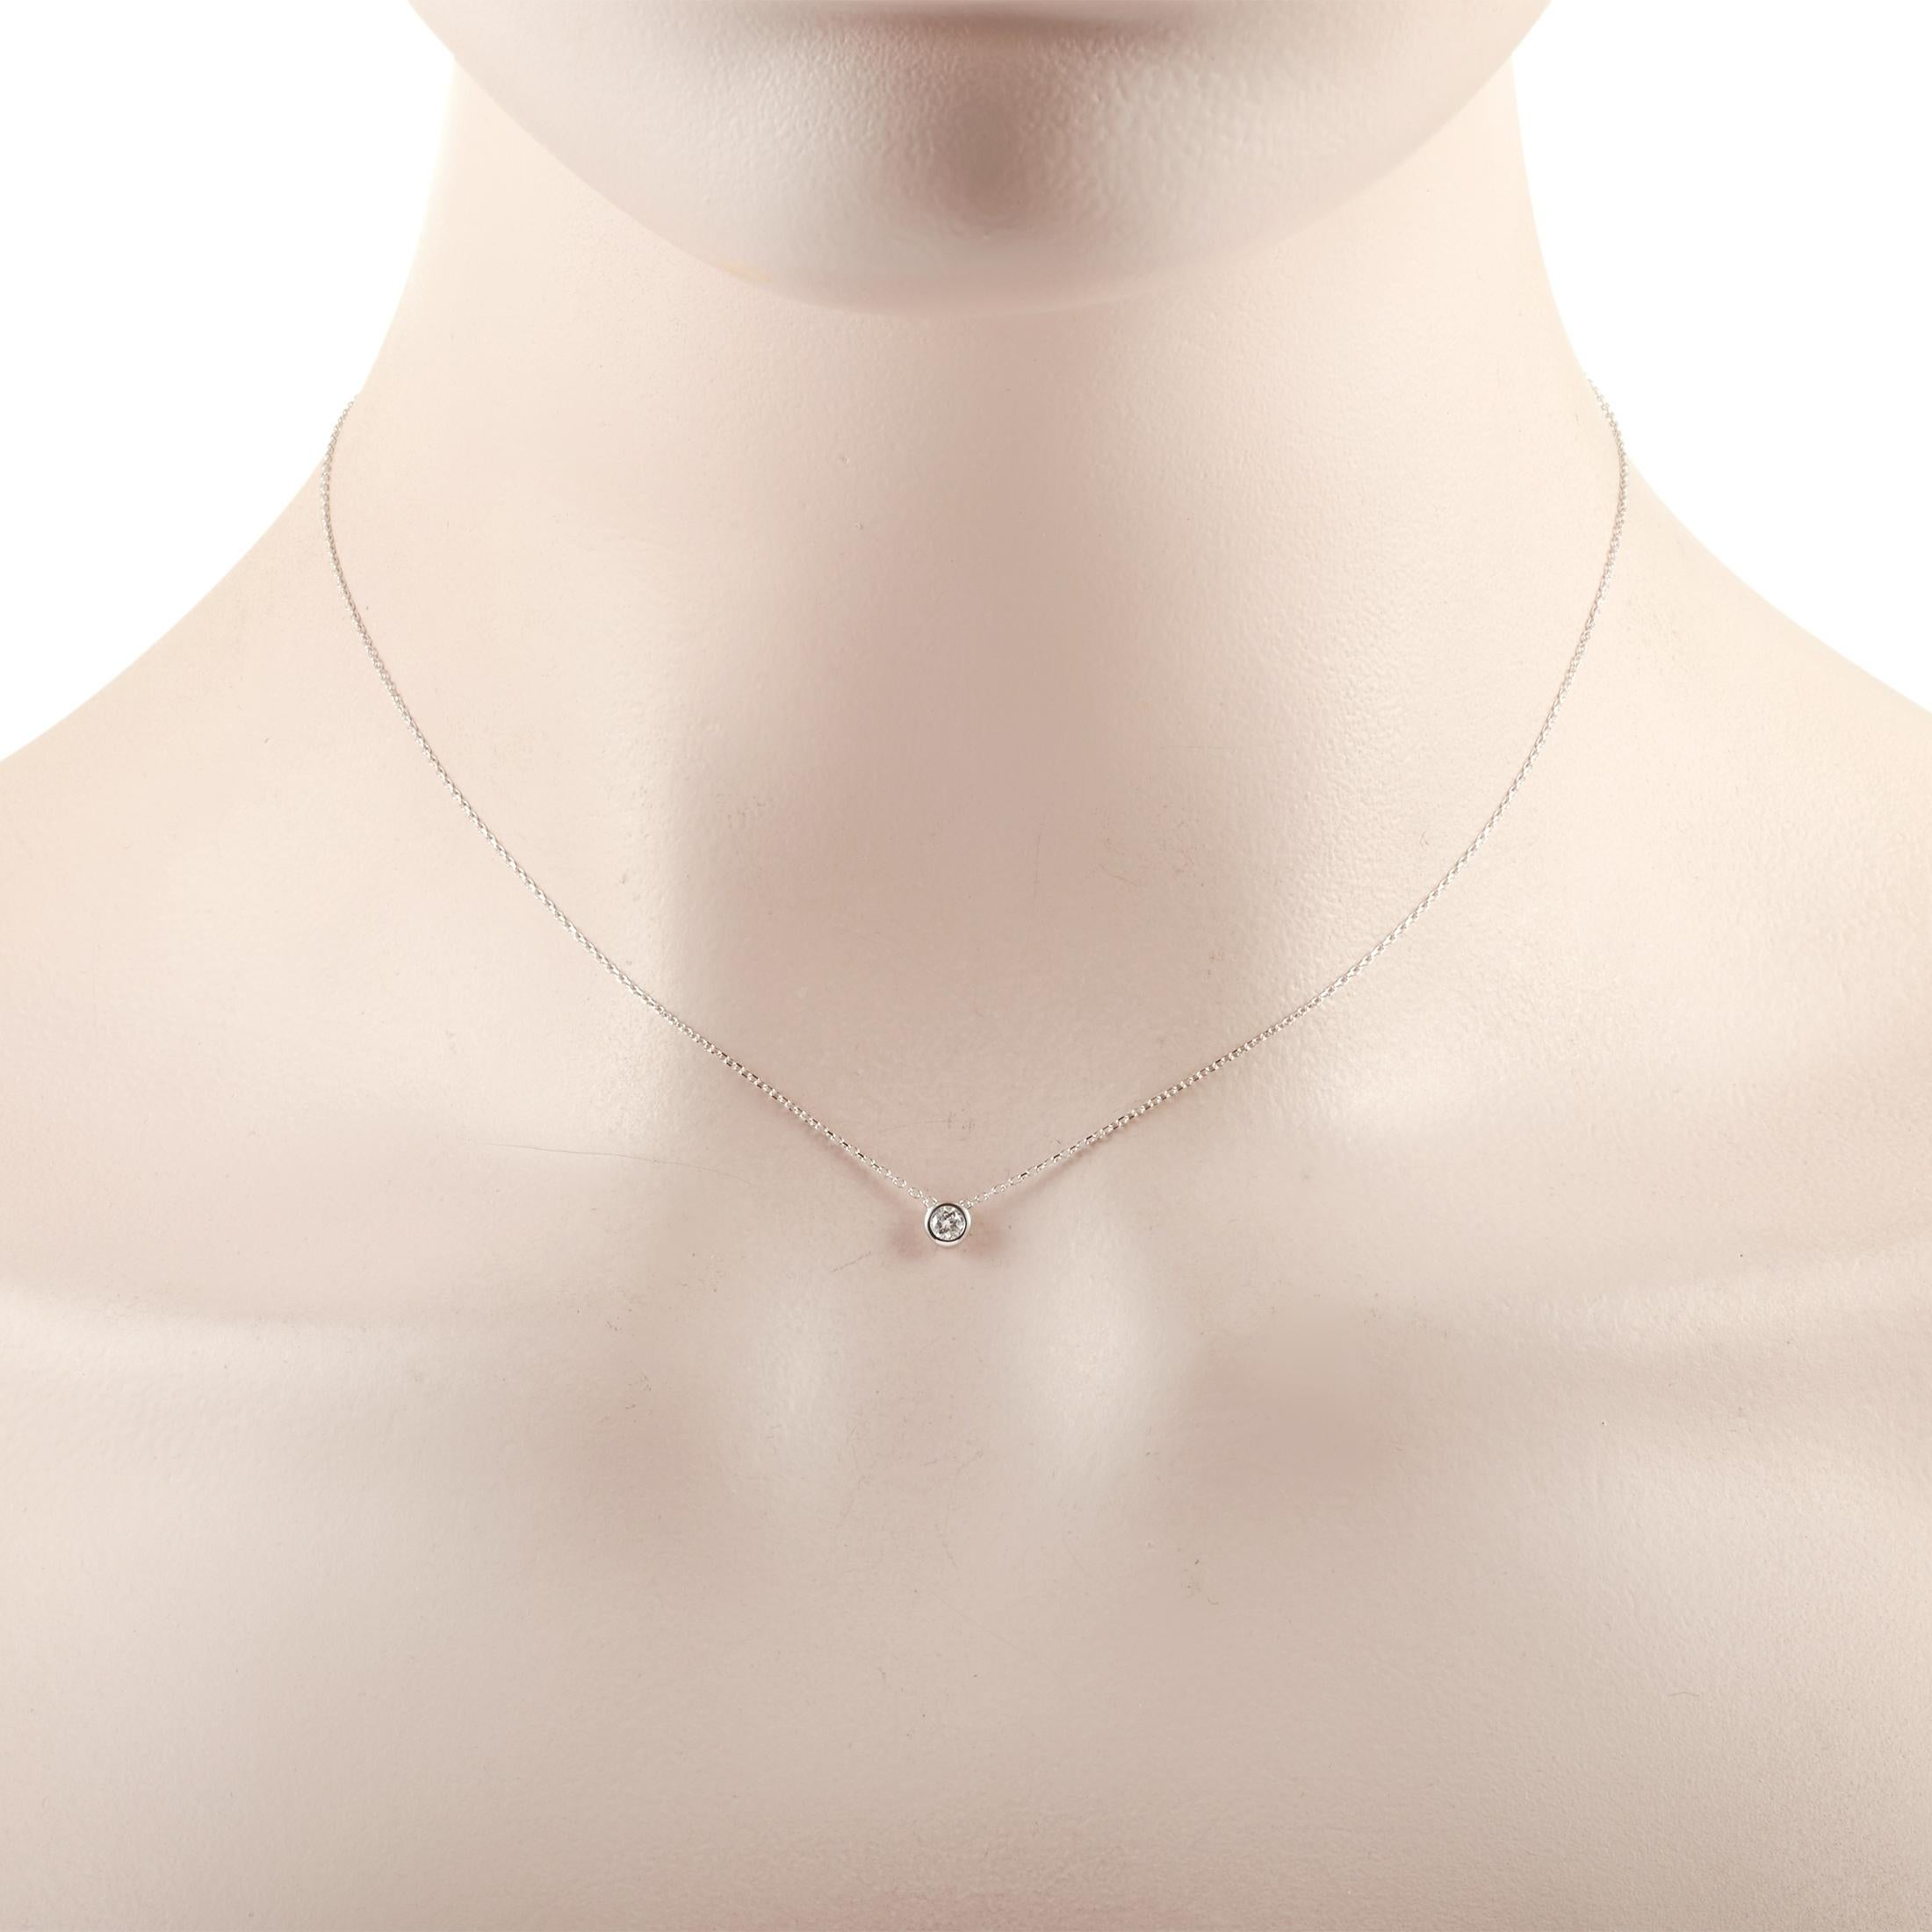 This LB Exclusive necklace is made of 14K white gold and embellished with a 0.10 ct diamond stone. The necklace weighs 1.2 grams and boasts a 15” chain and a pendant that measures 0.13” in length and 0.13” in width.
 
 Offered in brand new